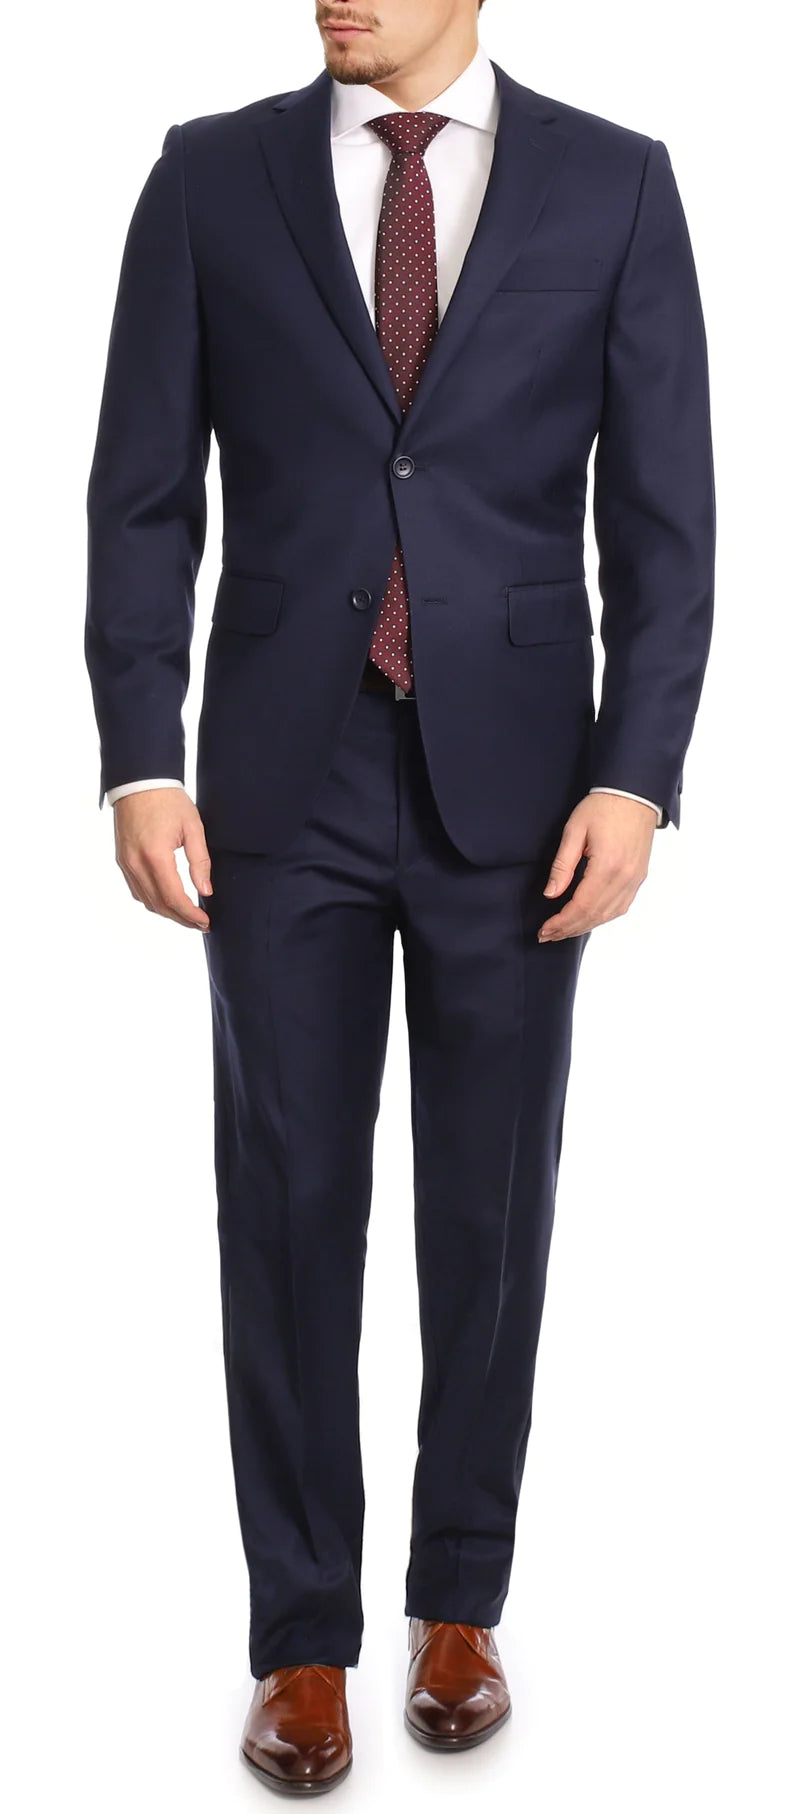 British Classic Mens Slim Fit Business Casual Casual Jackets For Men Solid  Color Suit For Weddings, Evening Balls, And Groomsmen From Frenzen, $54.47  | DHgate.Com